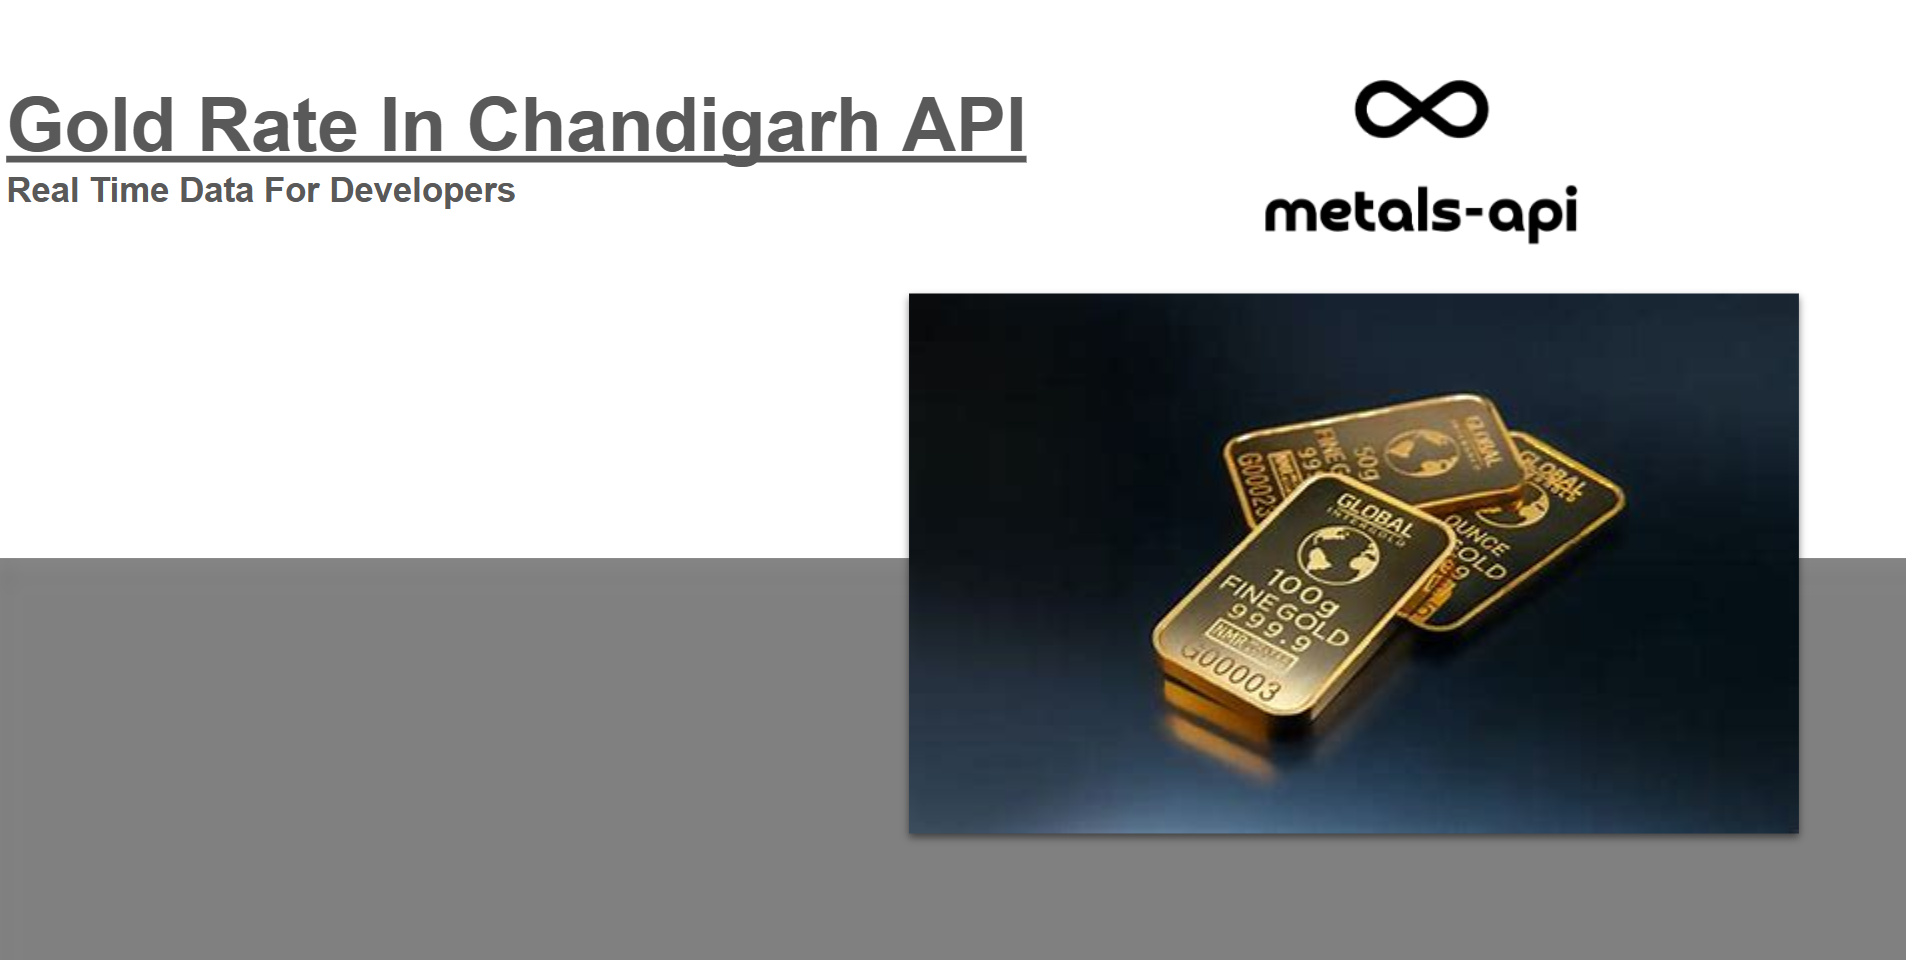 Gold Rate In Chandigarh API: Real Time Data For Developers